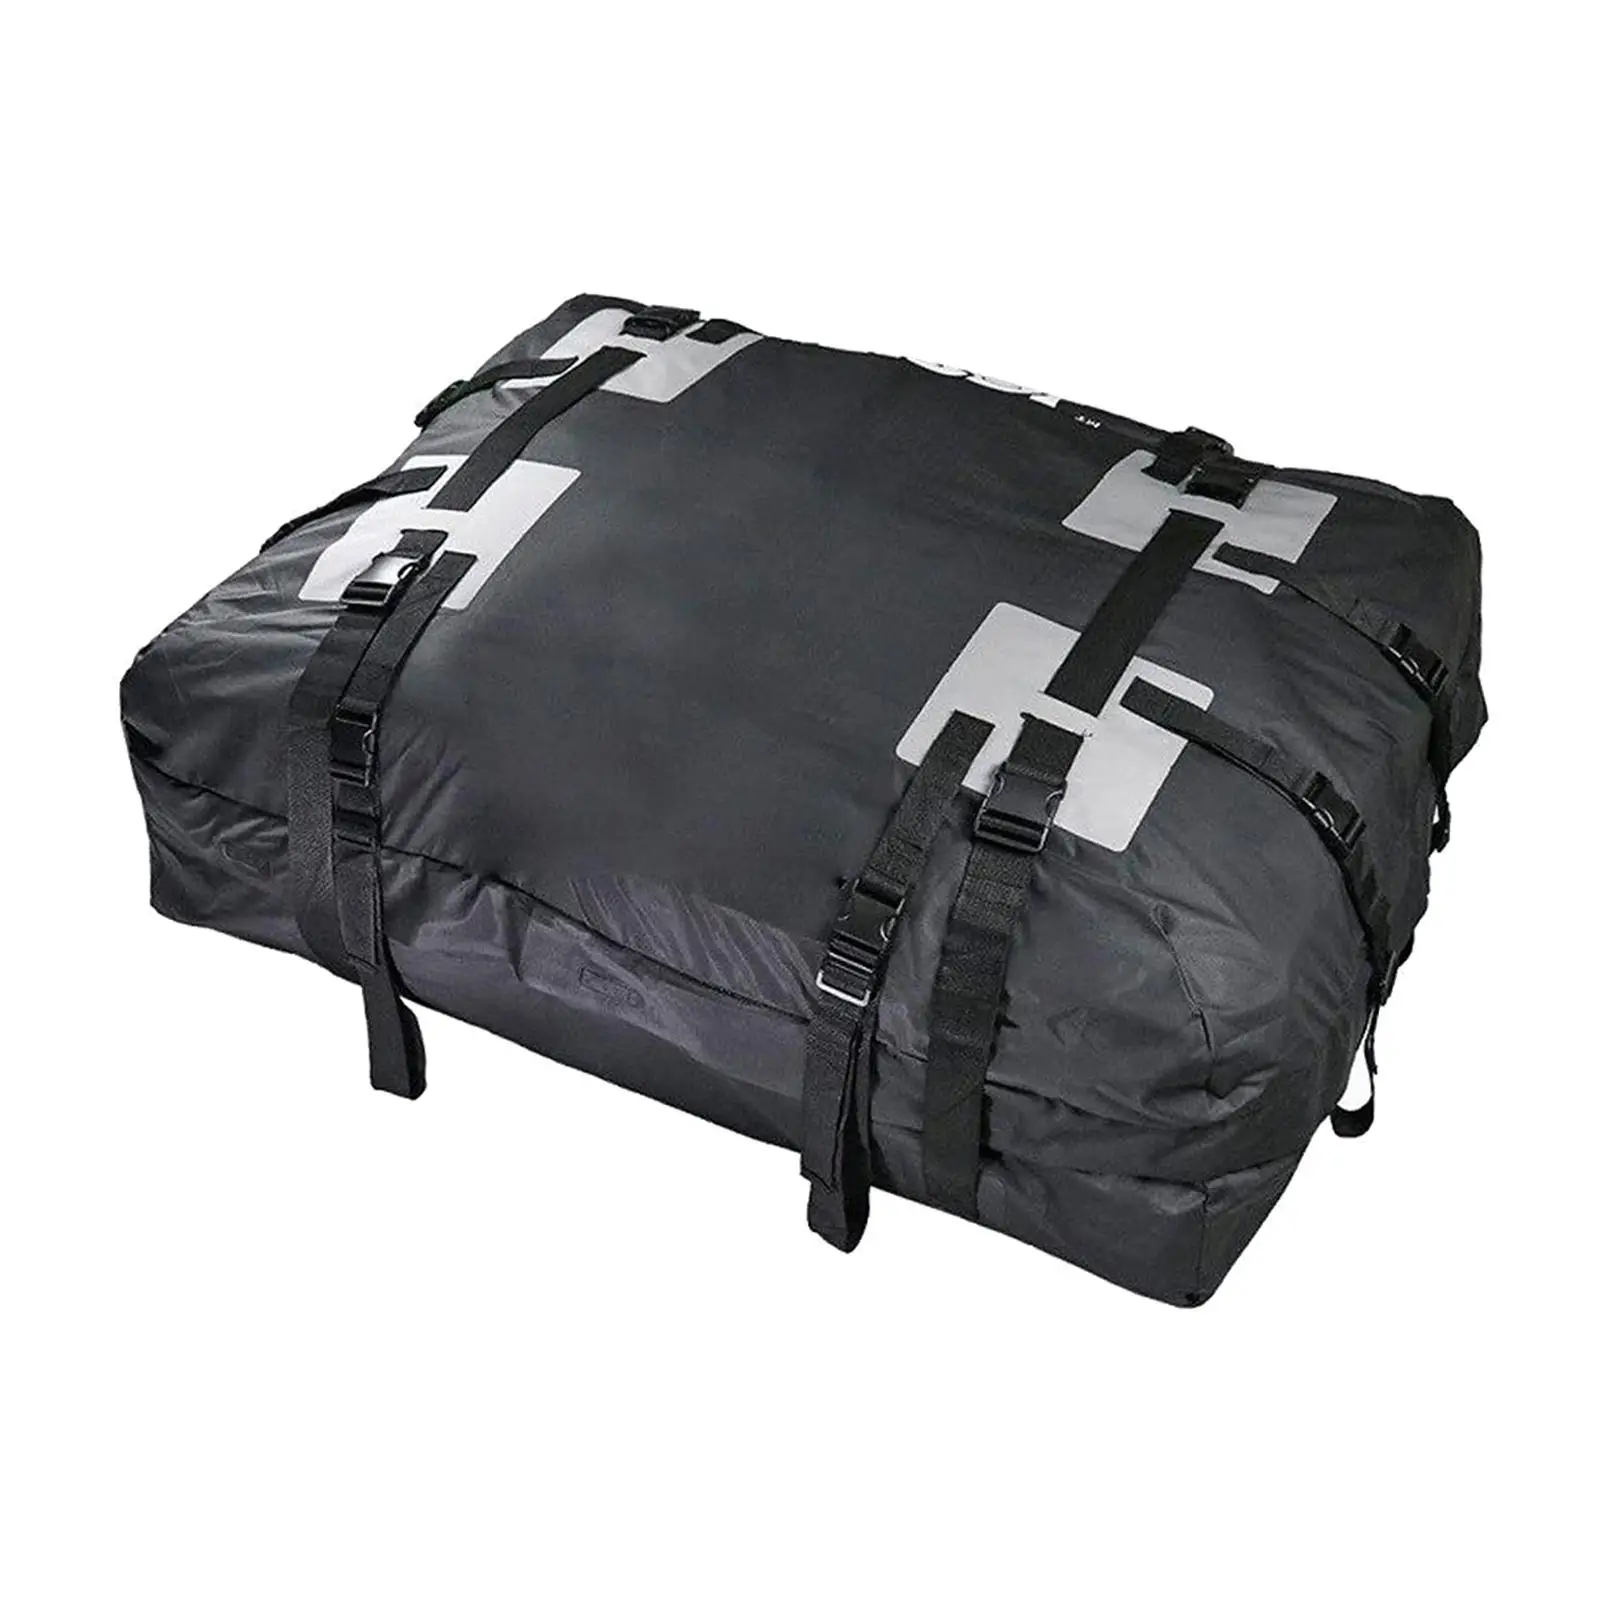 Car Rooftop Bag Reinforced Straps Travel Accessories Car Roof Luggage Bag